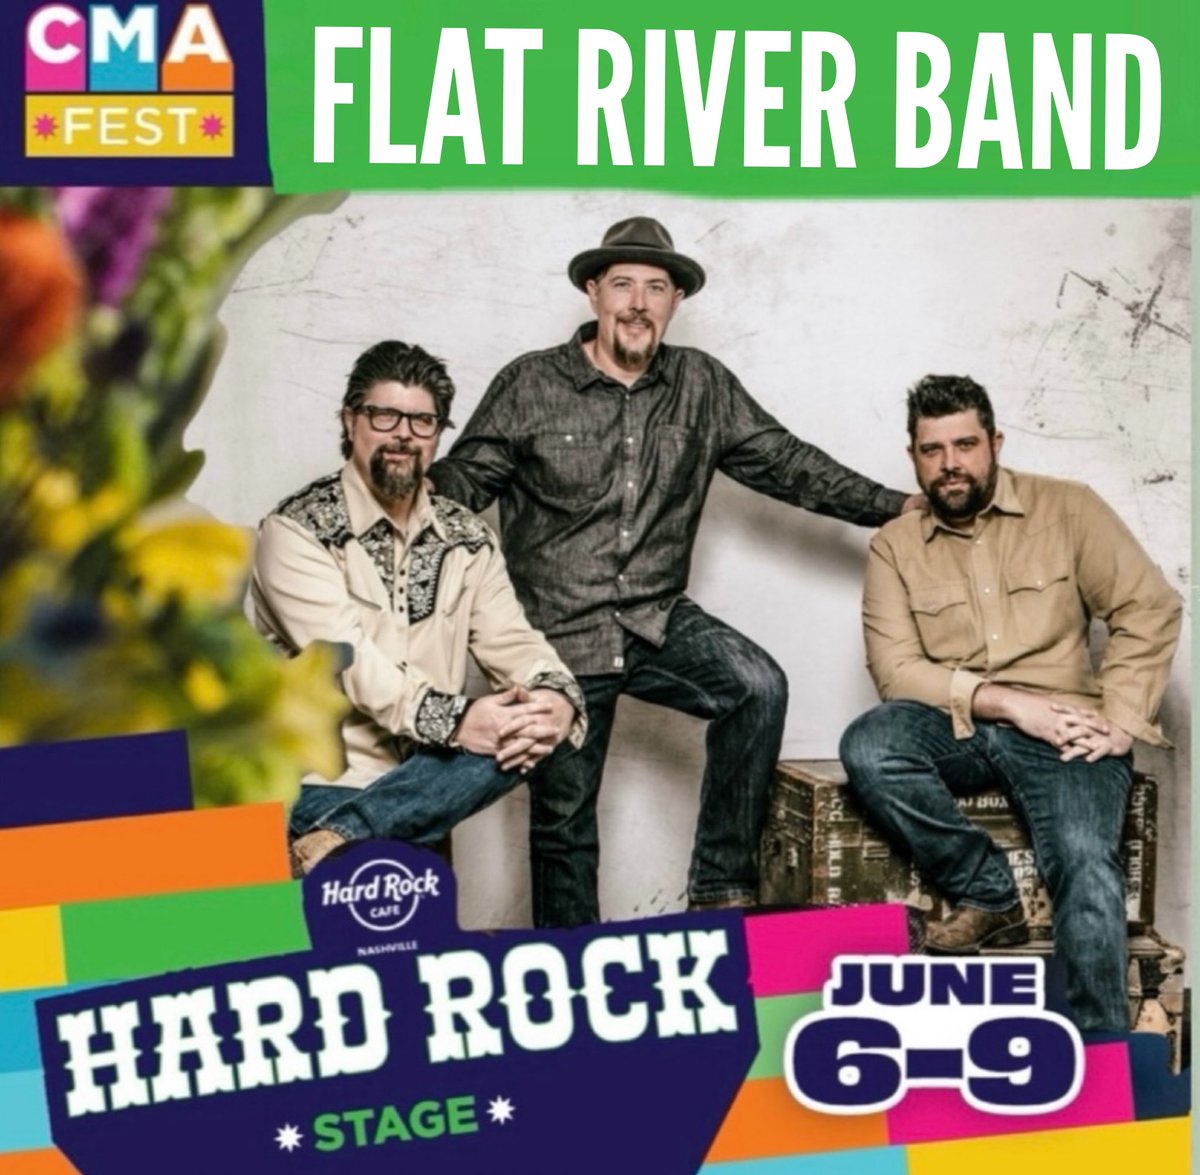 JUST ANNOUNCED! The brothers and I will be performing at @CountryMusic’s #CMAfest on the FREE Hard Rock Stage in support of the @CMAFoundation & music education. Visit CMAfest.com for more info & ticket options. #countrymusic #trioofcountrymusic #flatriverband